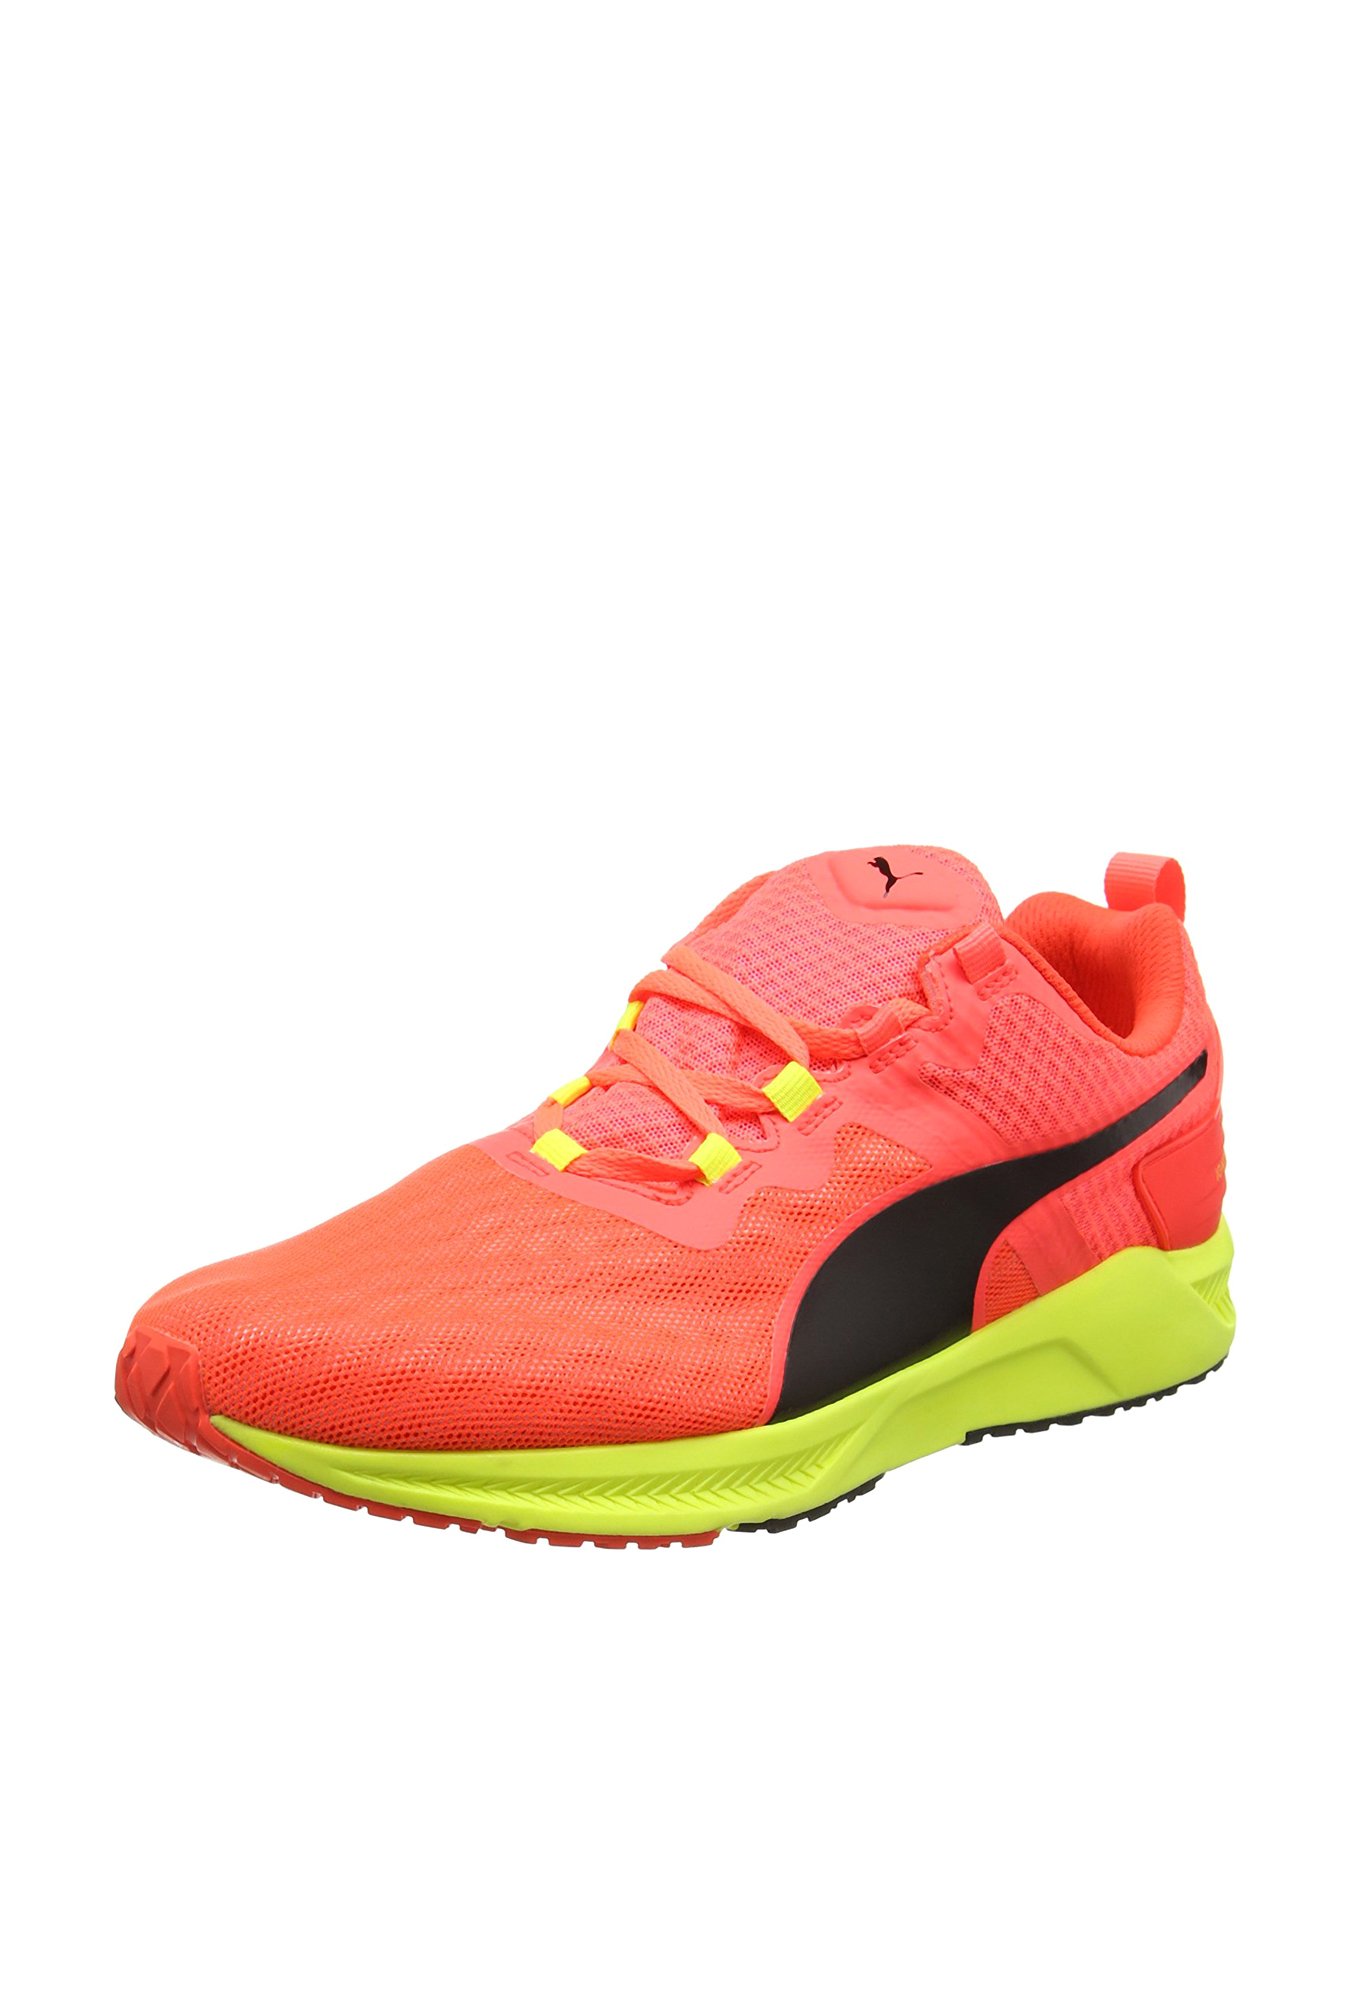 Puma Ignite XT v2 Peach & Black Running Shoes from top Brands at Best Prices Online in India | Tata